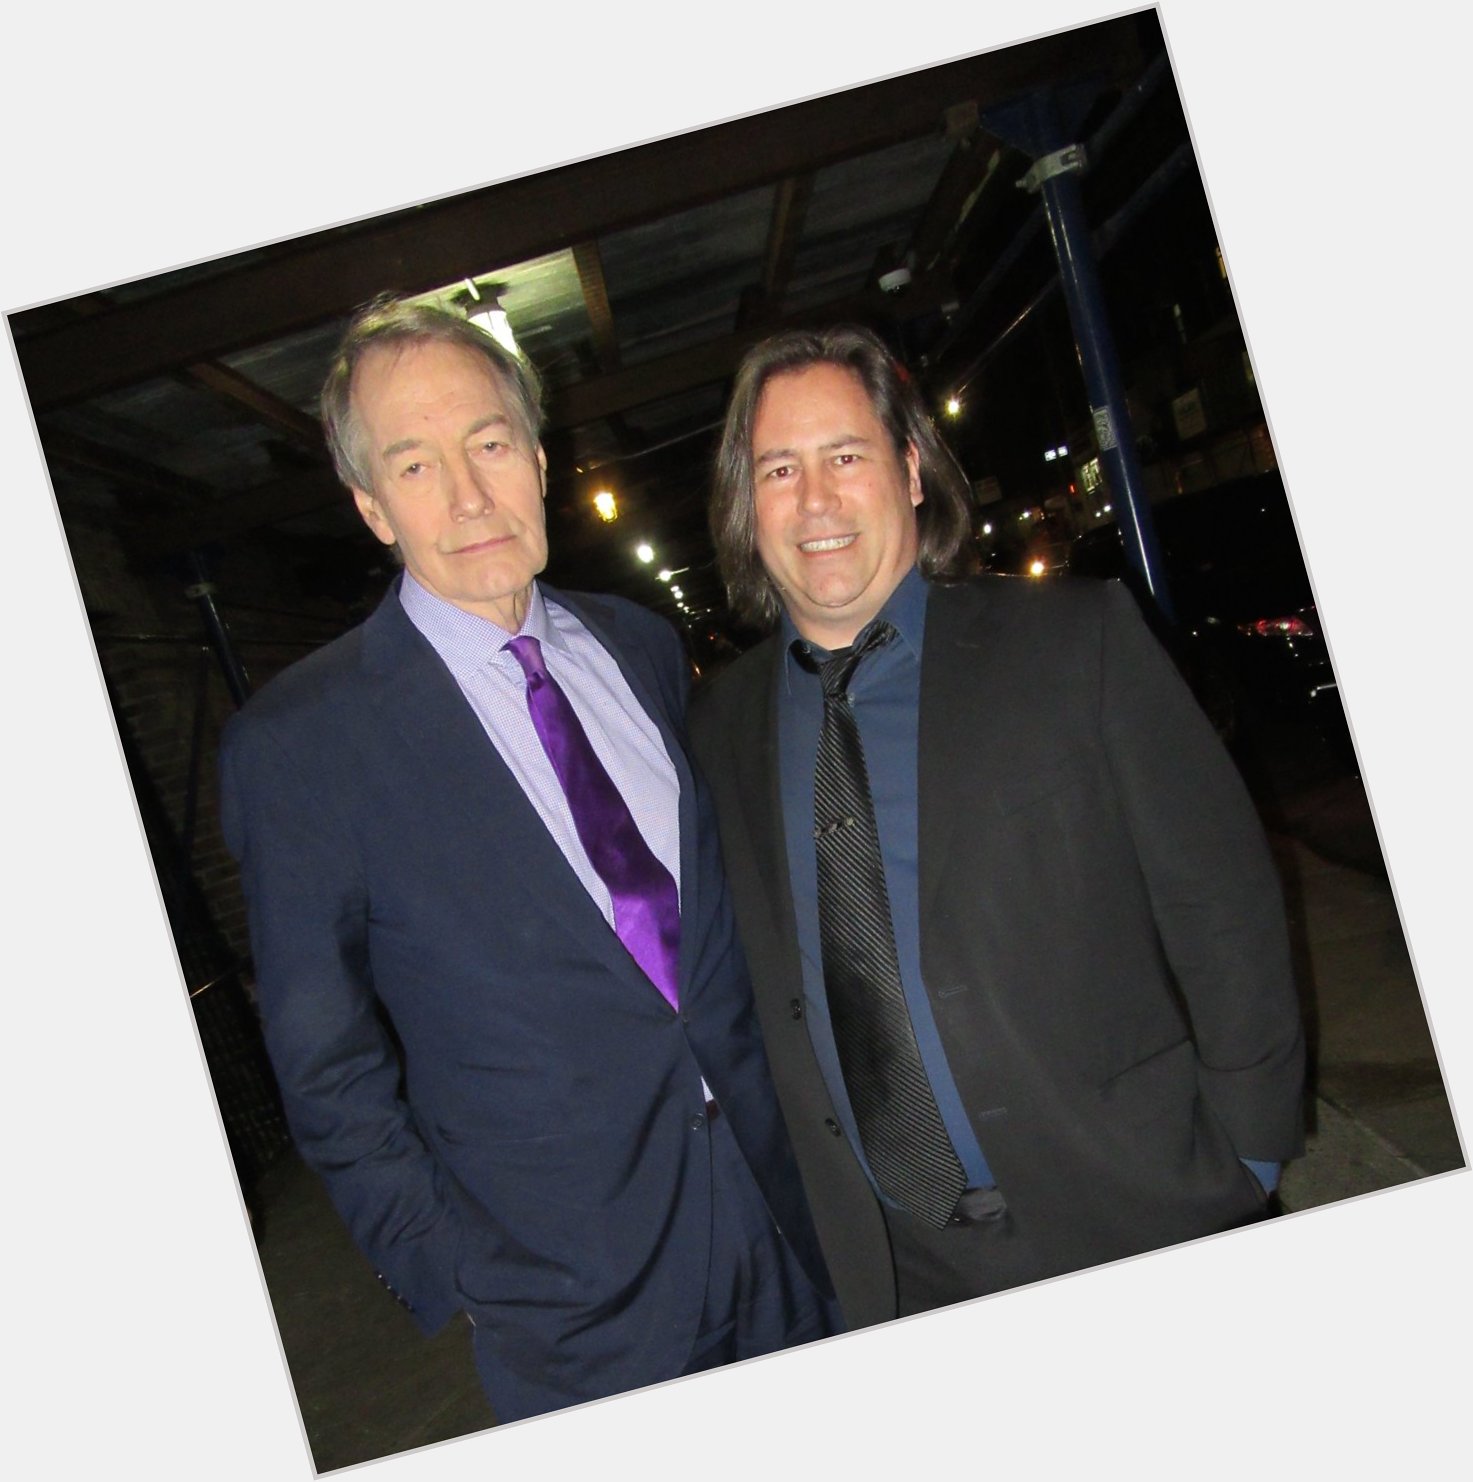 Happy Birthday to the fiercely intelligent & inquisitive host of the self-titled PBS interview show... Charlie Rose! 